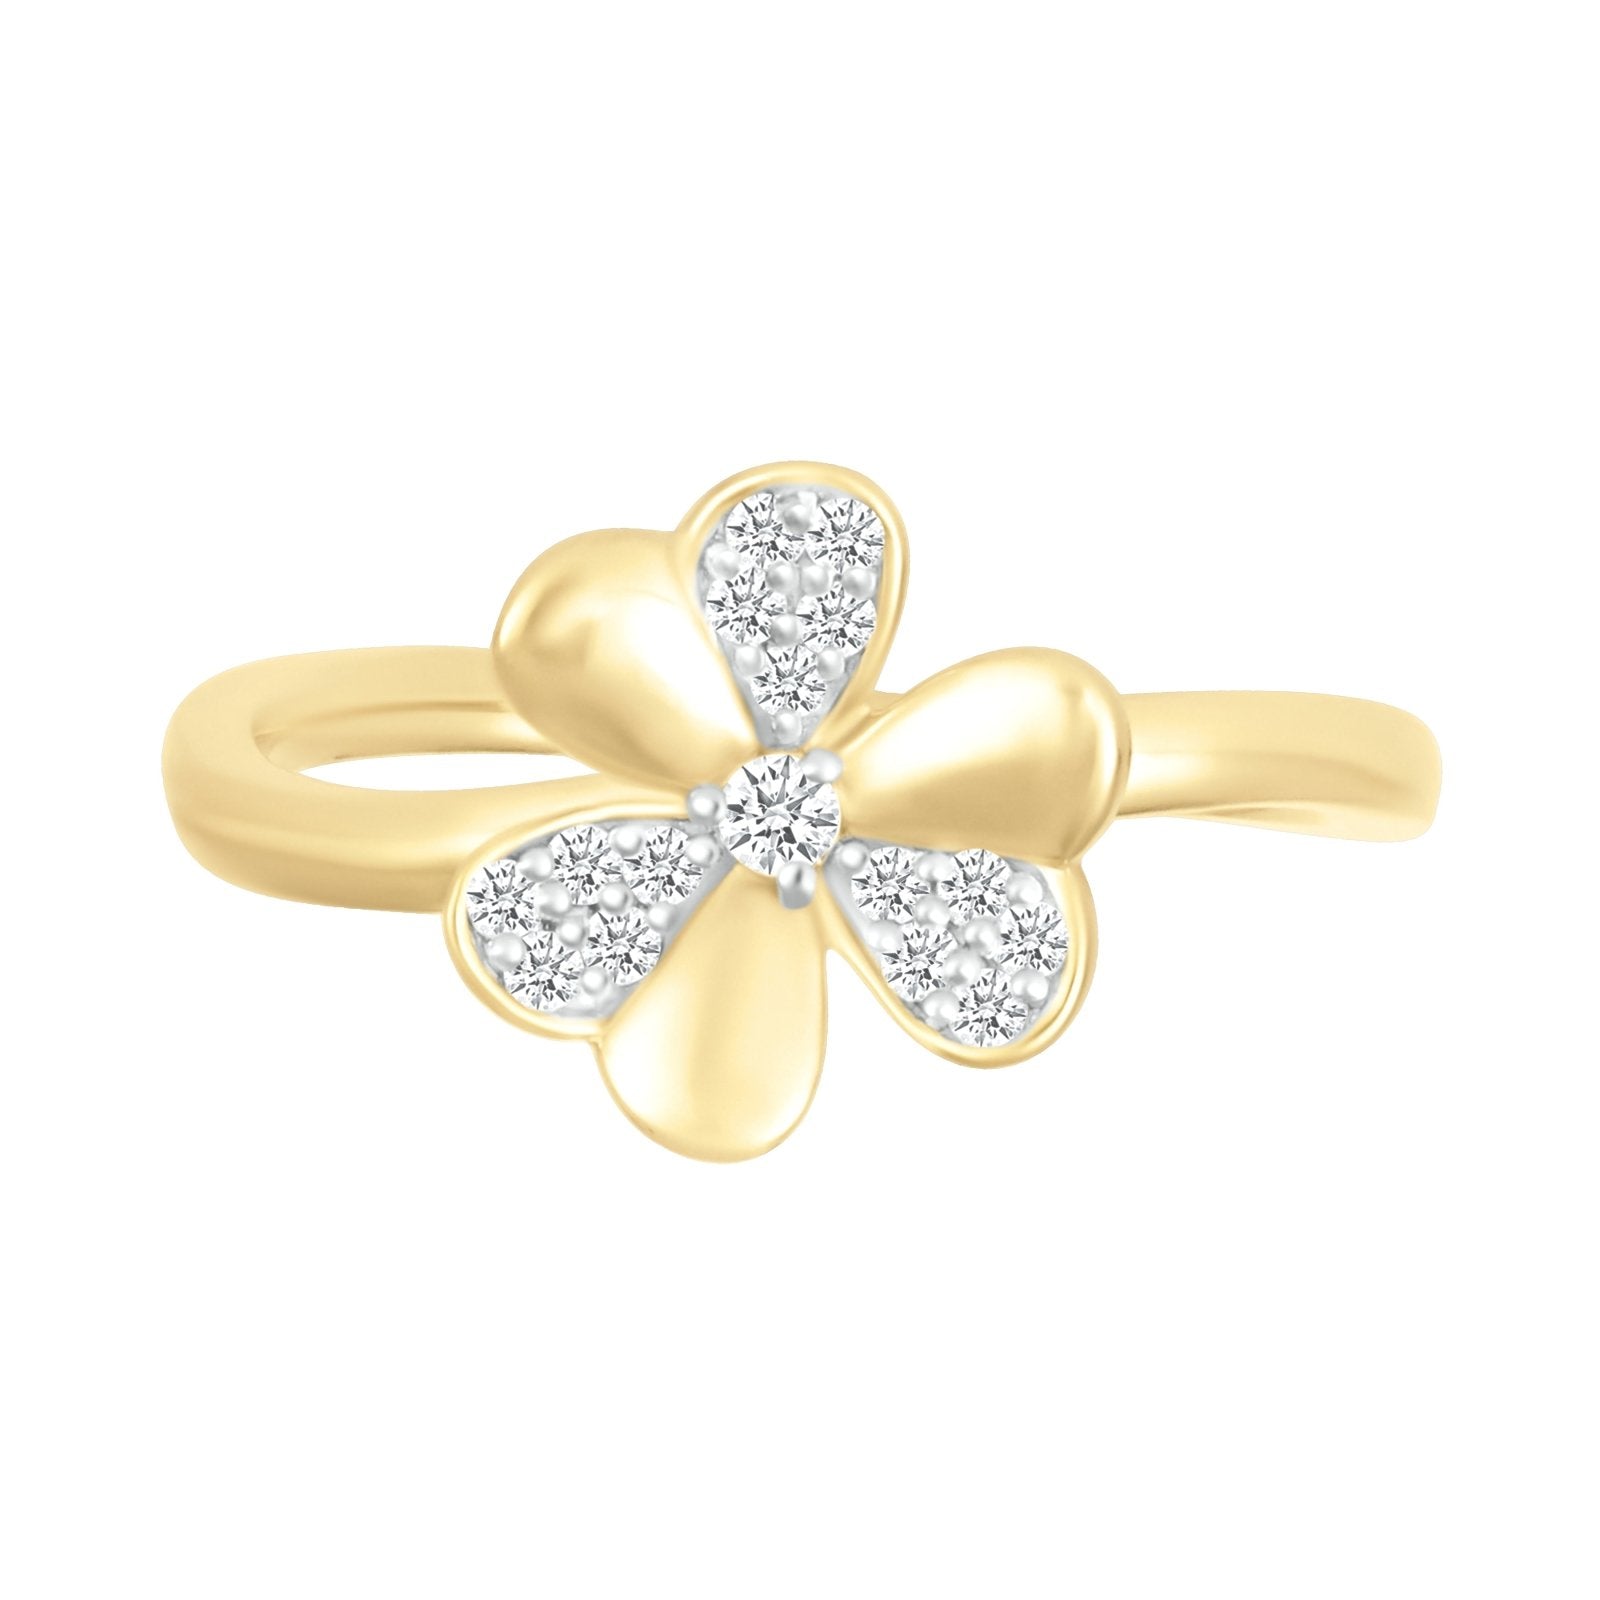 Diamond Pave Three Leaf Lucky Clover Ring Rings Estella Collection #product_description# 32760 10k April Birthstone Colorless Gemstone #tag4# #tag5# #tag6# #tag7# #tag8# #tag9# #tag10#